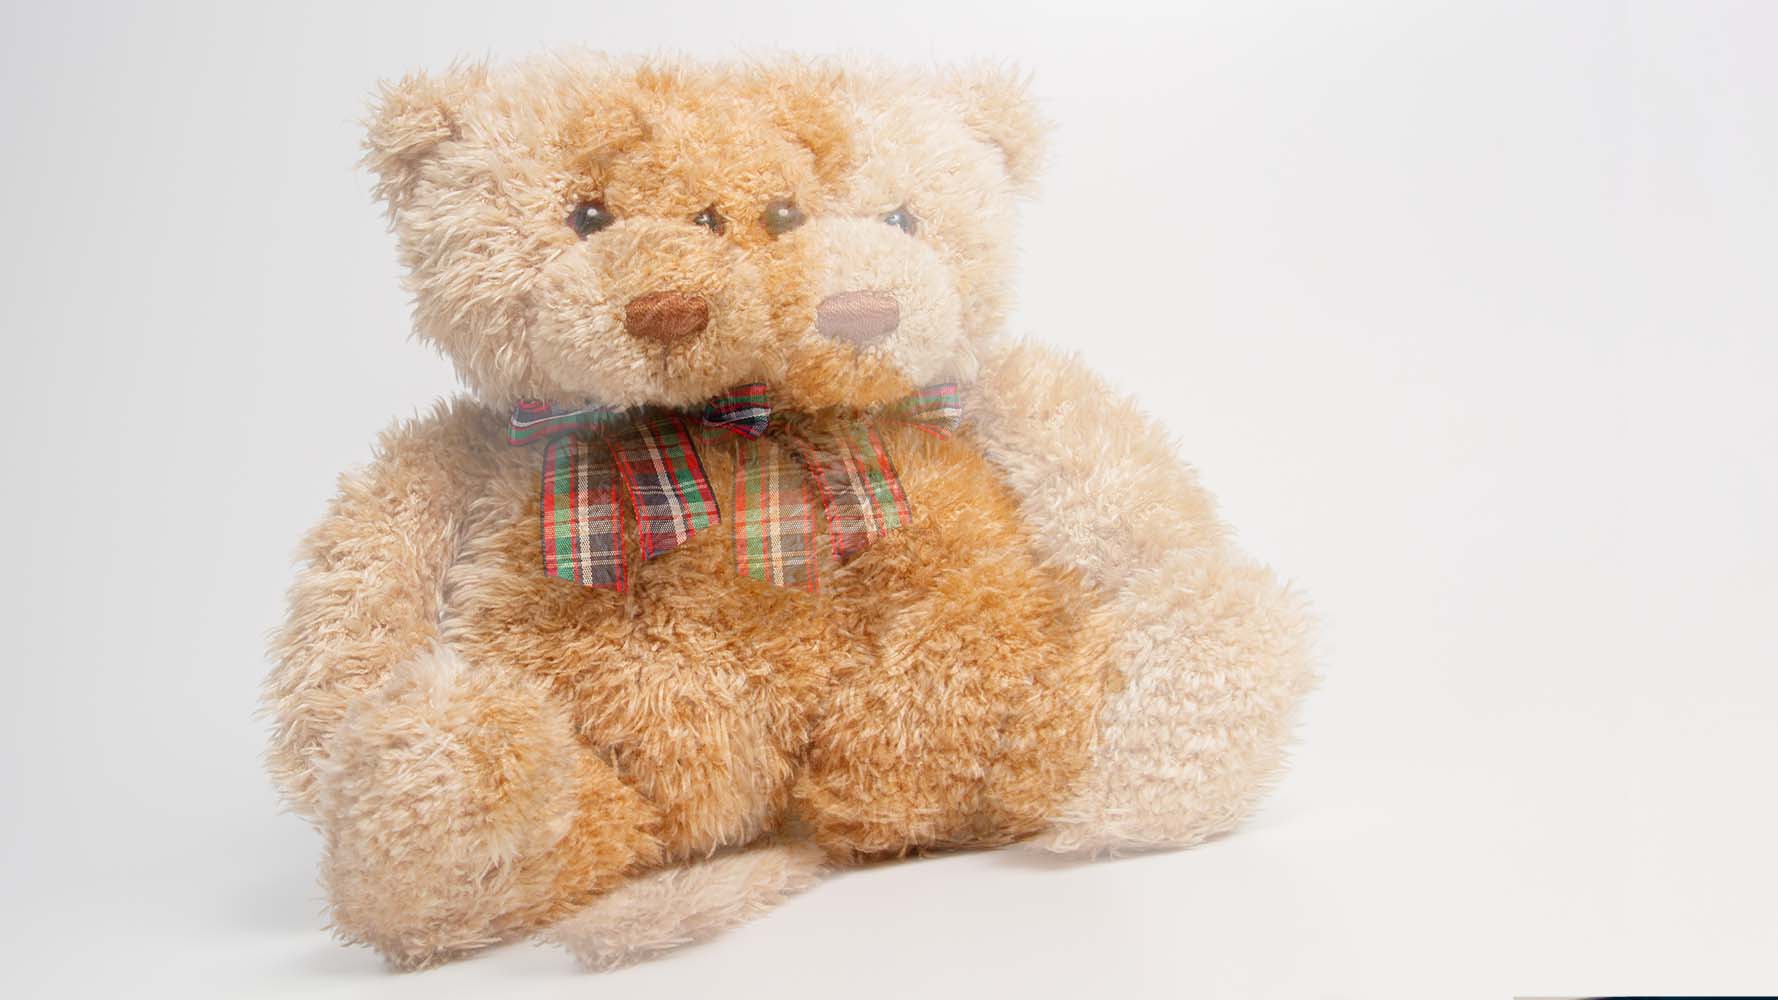 Image of a teddy bear which appears blurred and distorted, this represents how someone with Strabismus might view the same image.